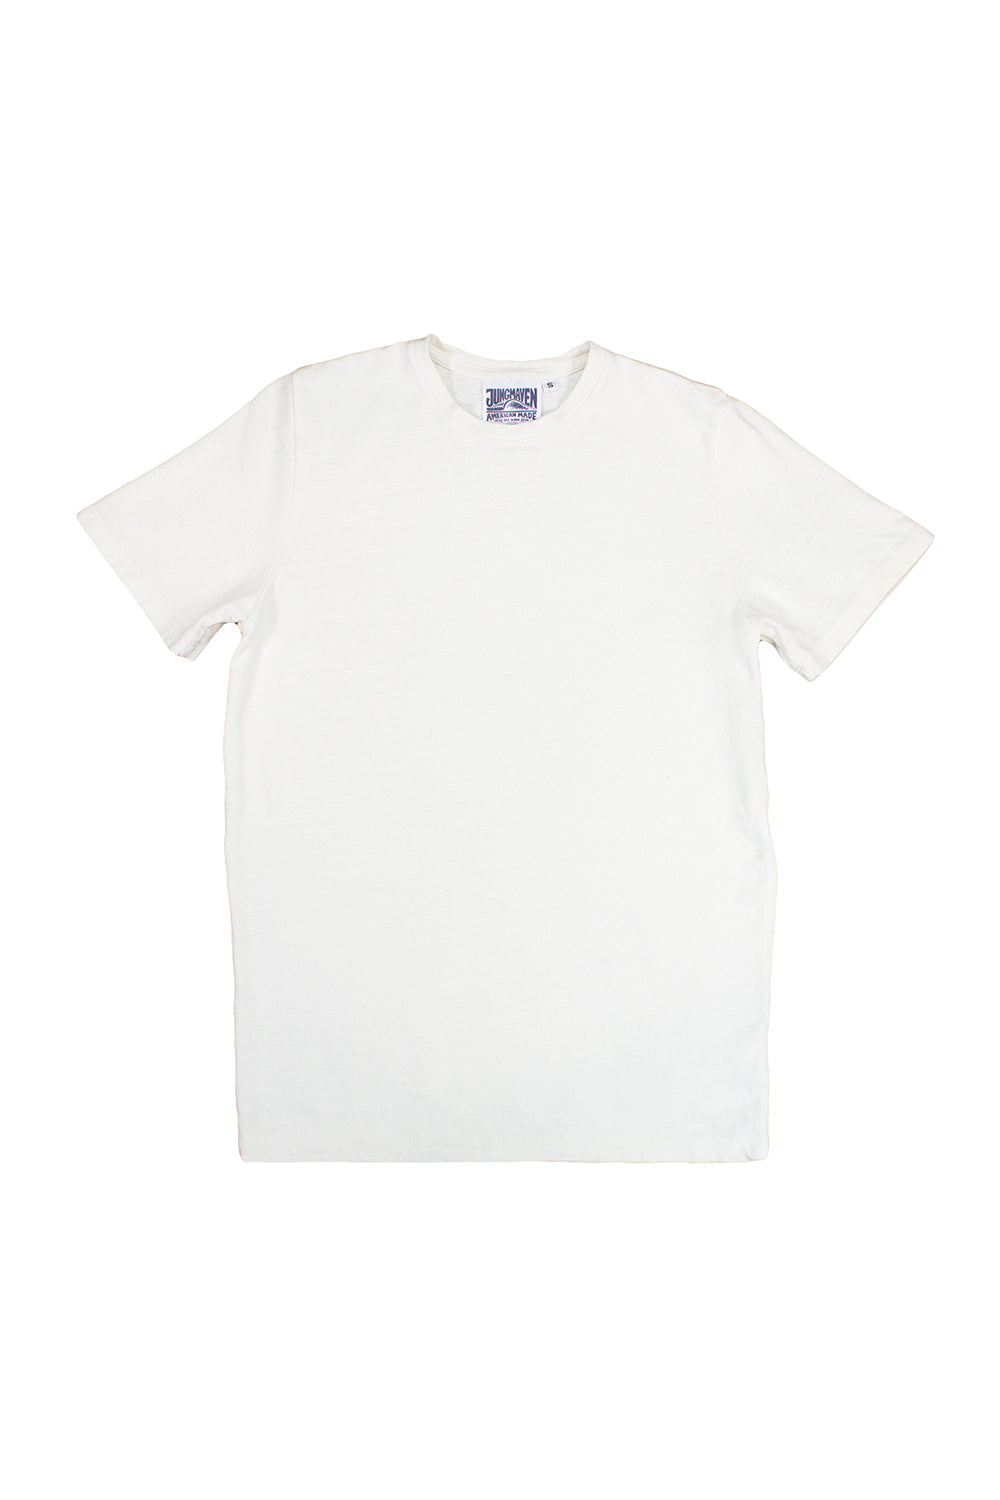 Boulder Tee | Jungmaven Hemp Clothing & Accessories / Color: Washed White